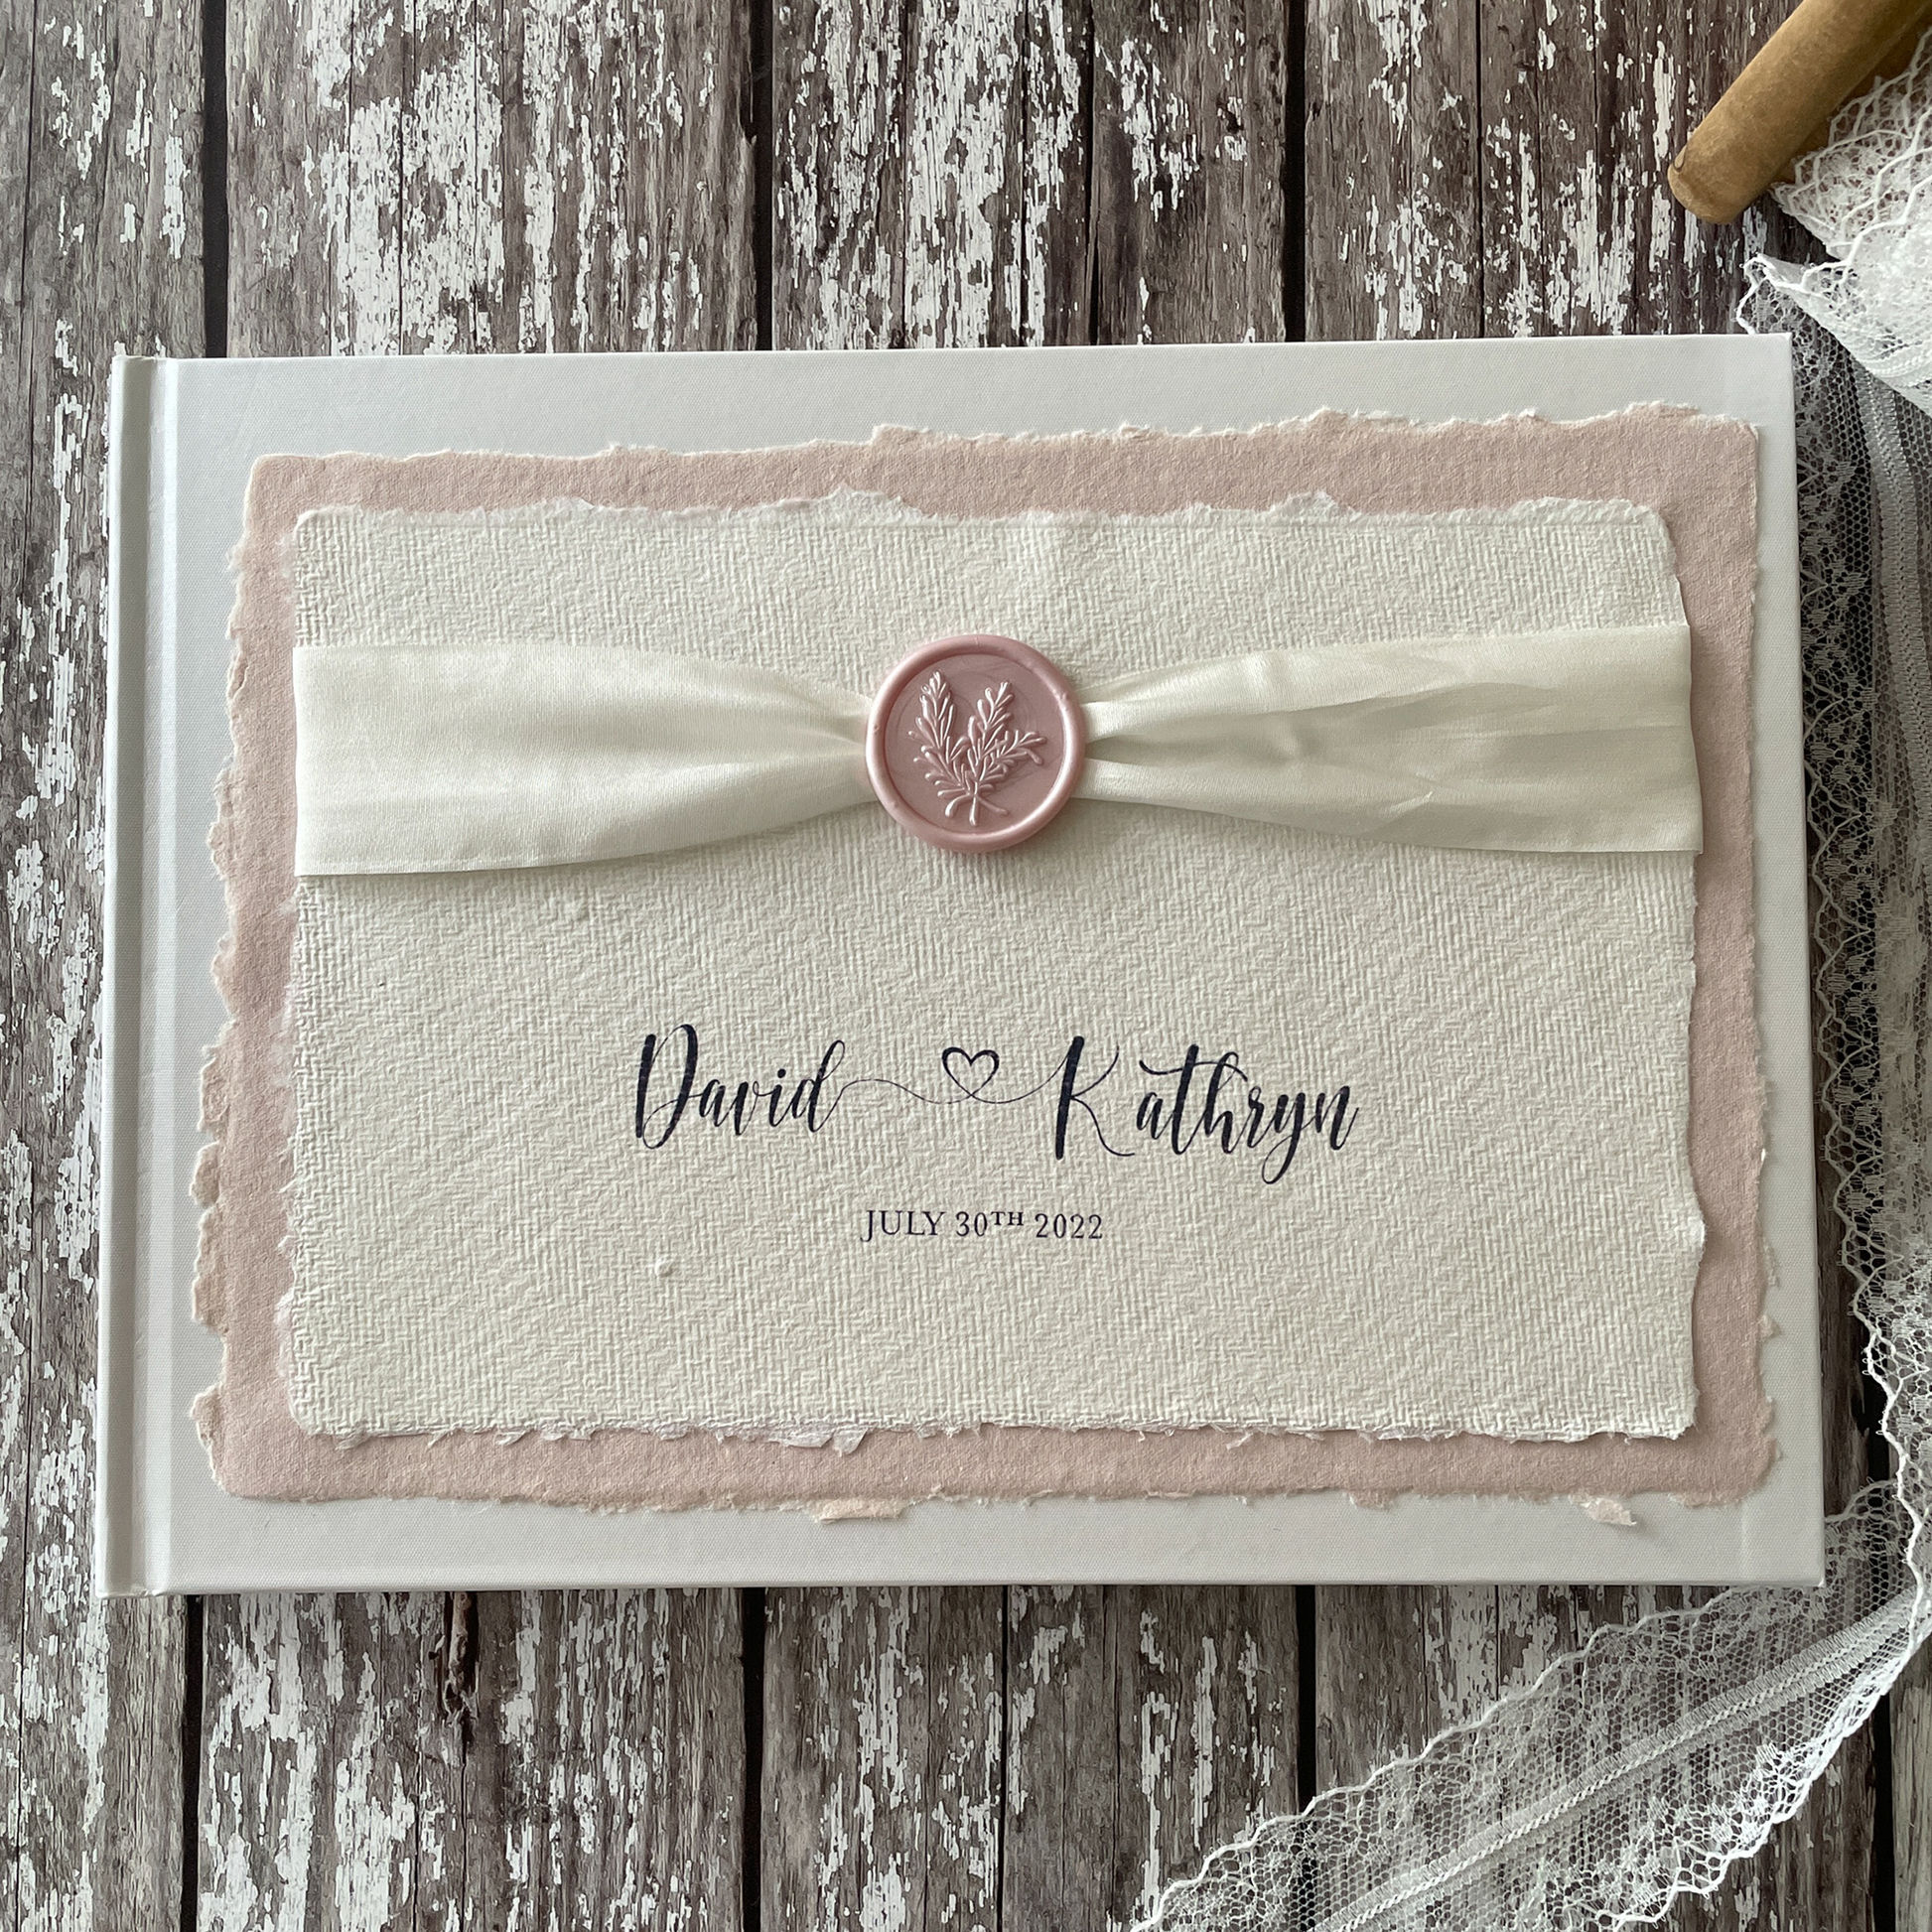 Personalised wedding guest book made from eco friendly materials By The Natural Paper Company.  Handmade paper guest book, recycled cotton rag paper and card; Silk Ribbon and a Wax seal in ivory and blush pink.  